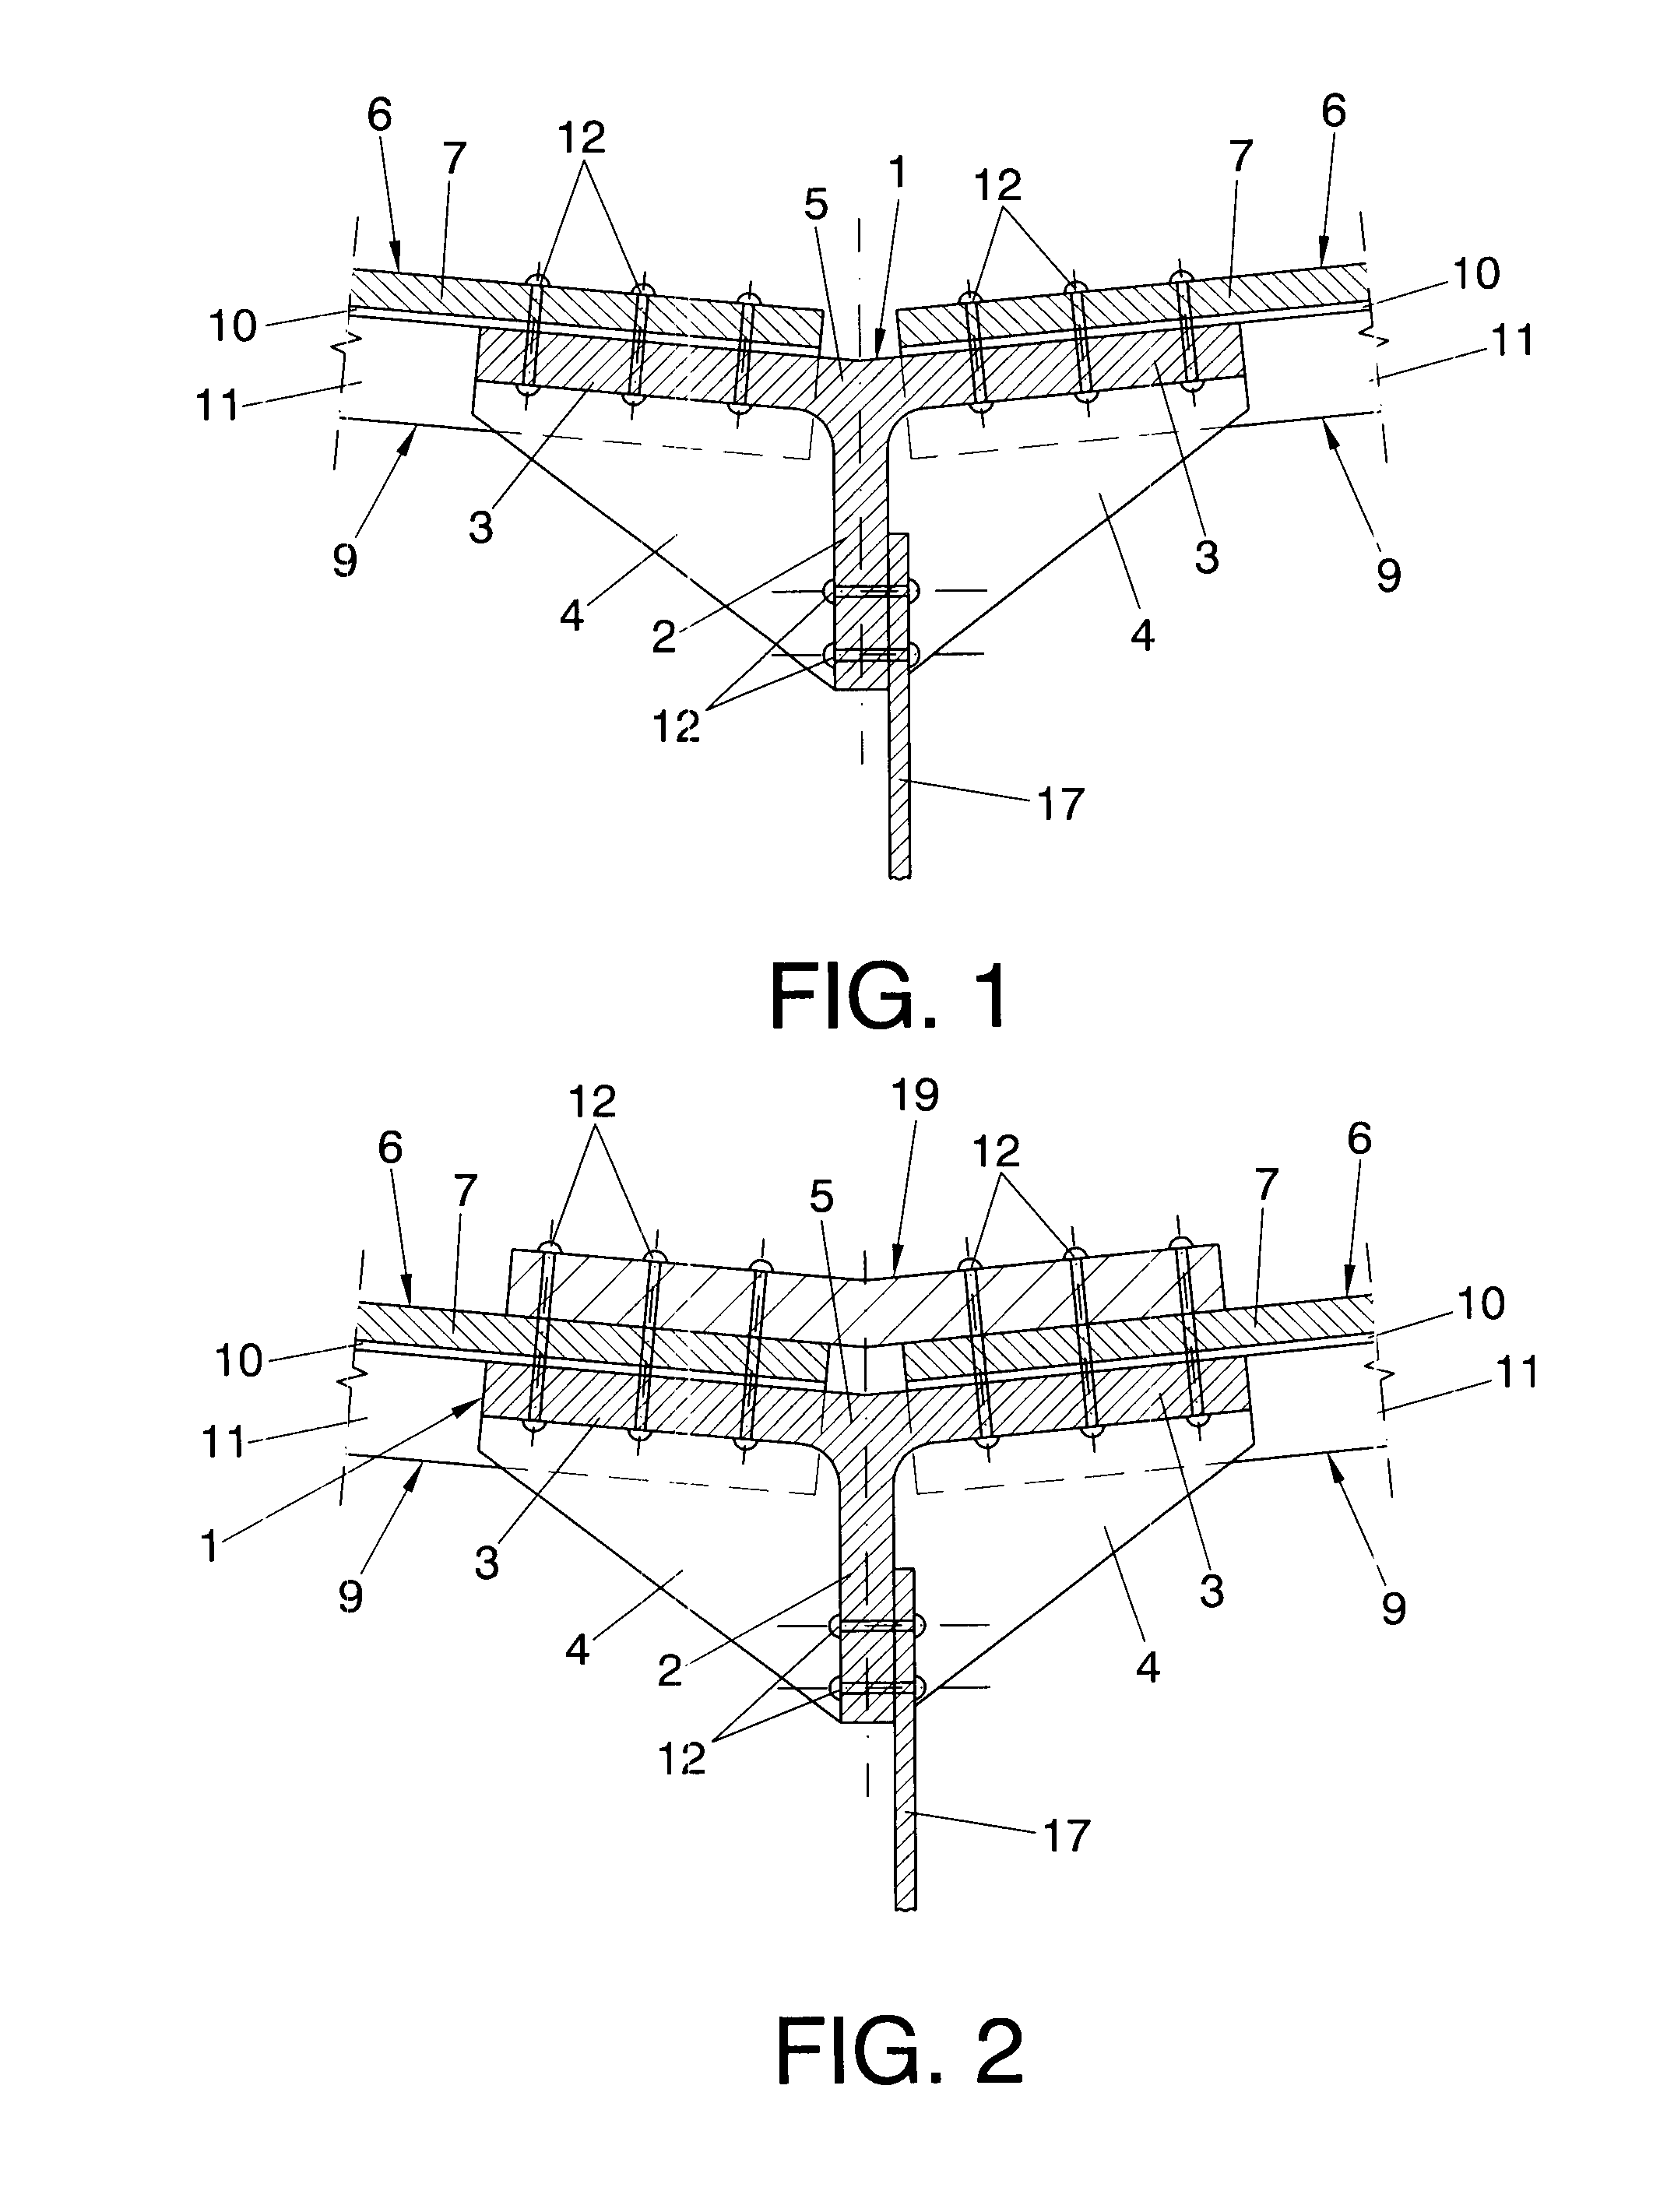 Structure for joining torsion boxes in an aircraft using a triform fitting made from non-metallic composite materials